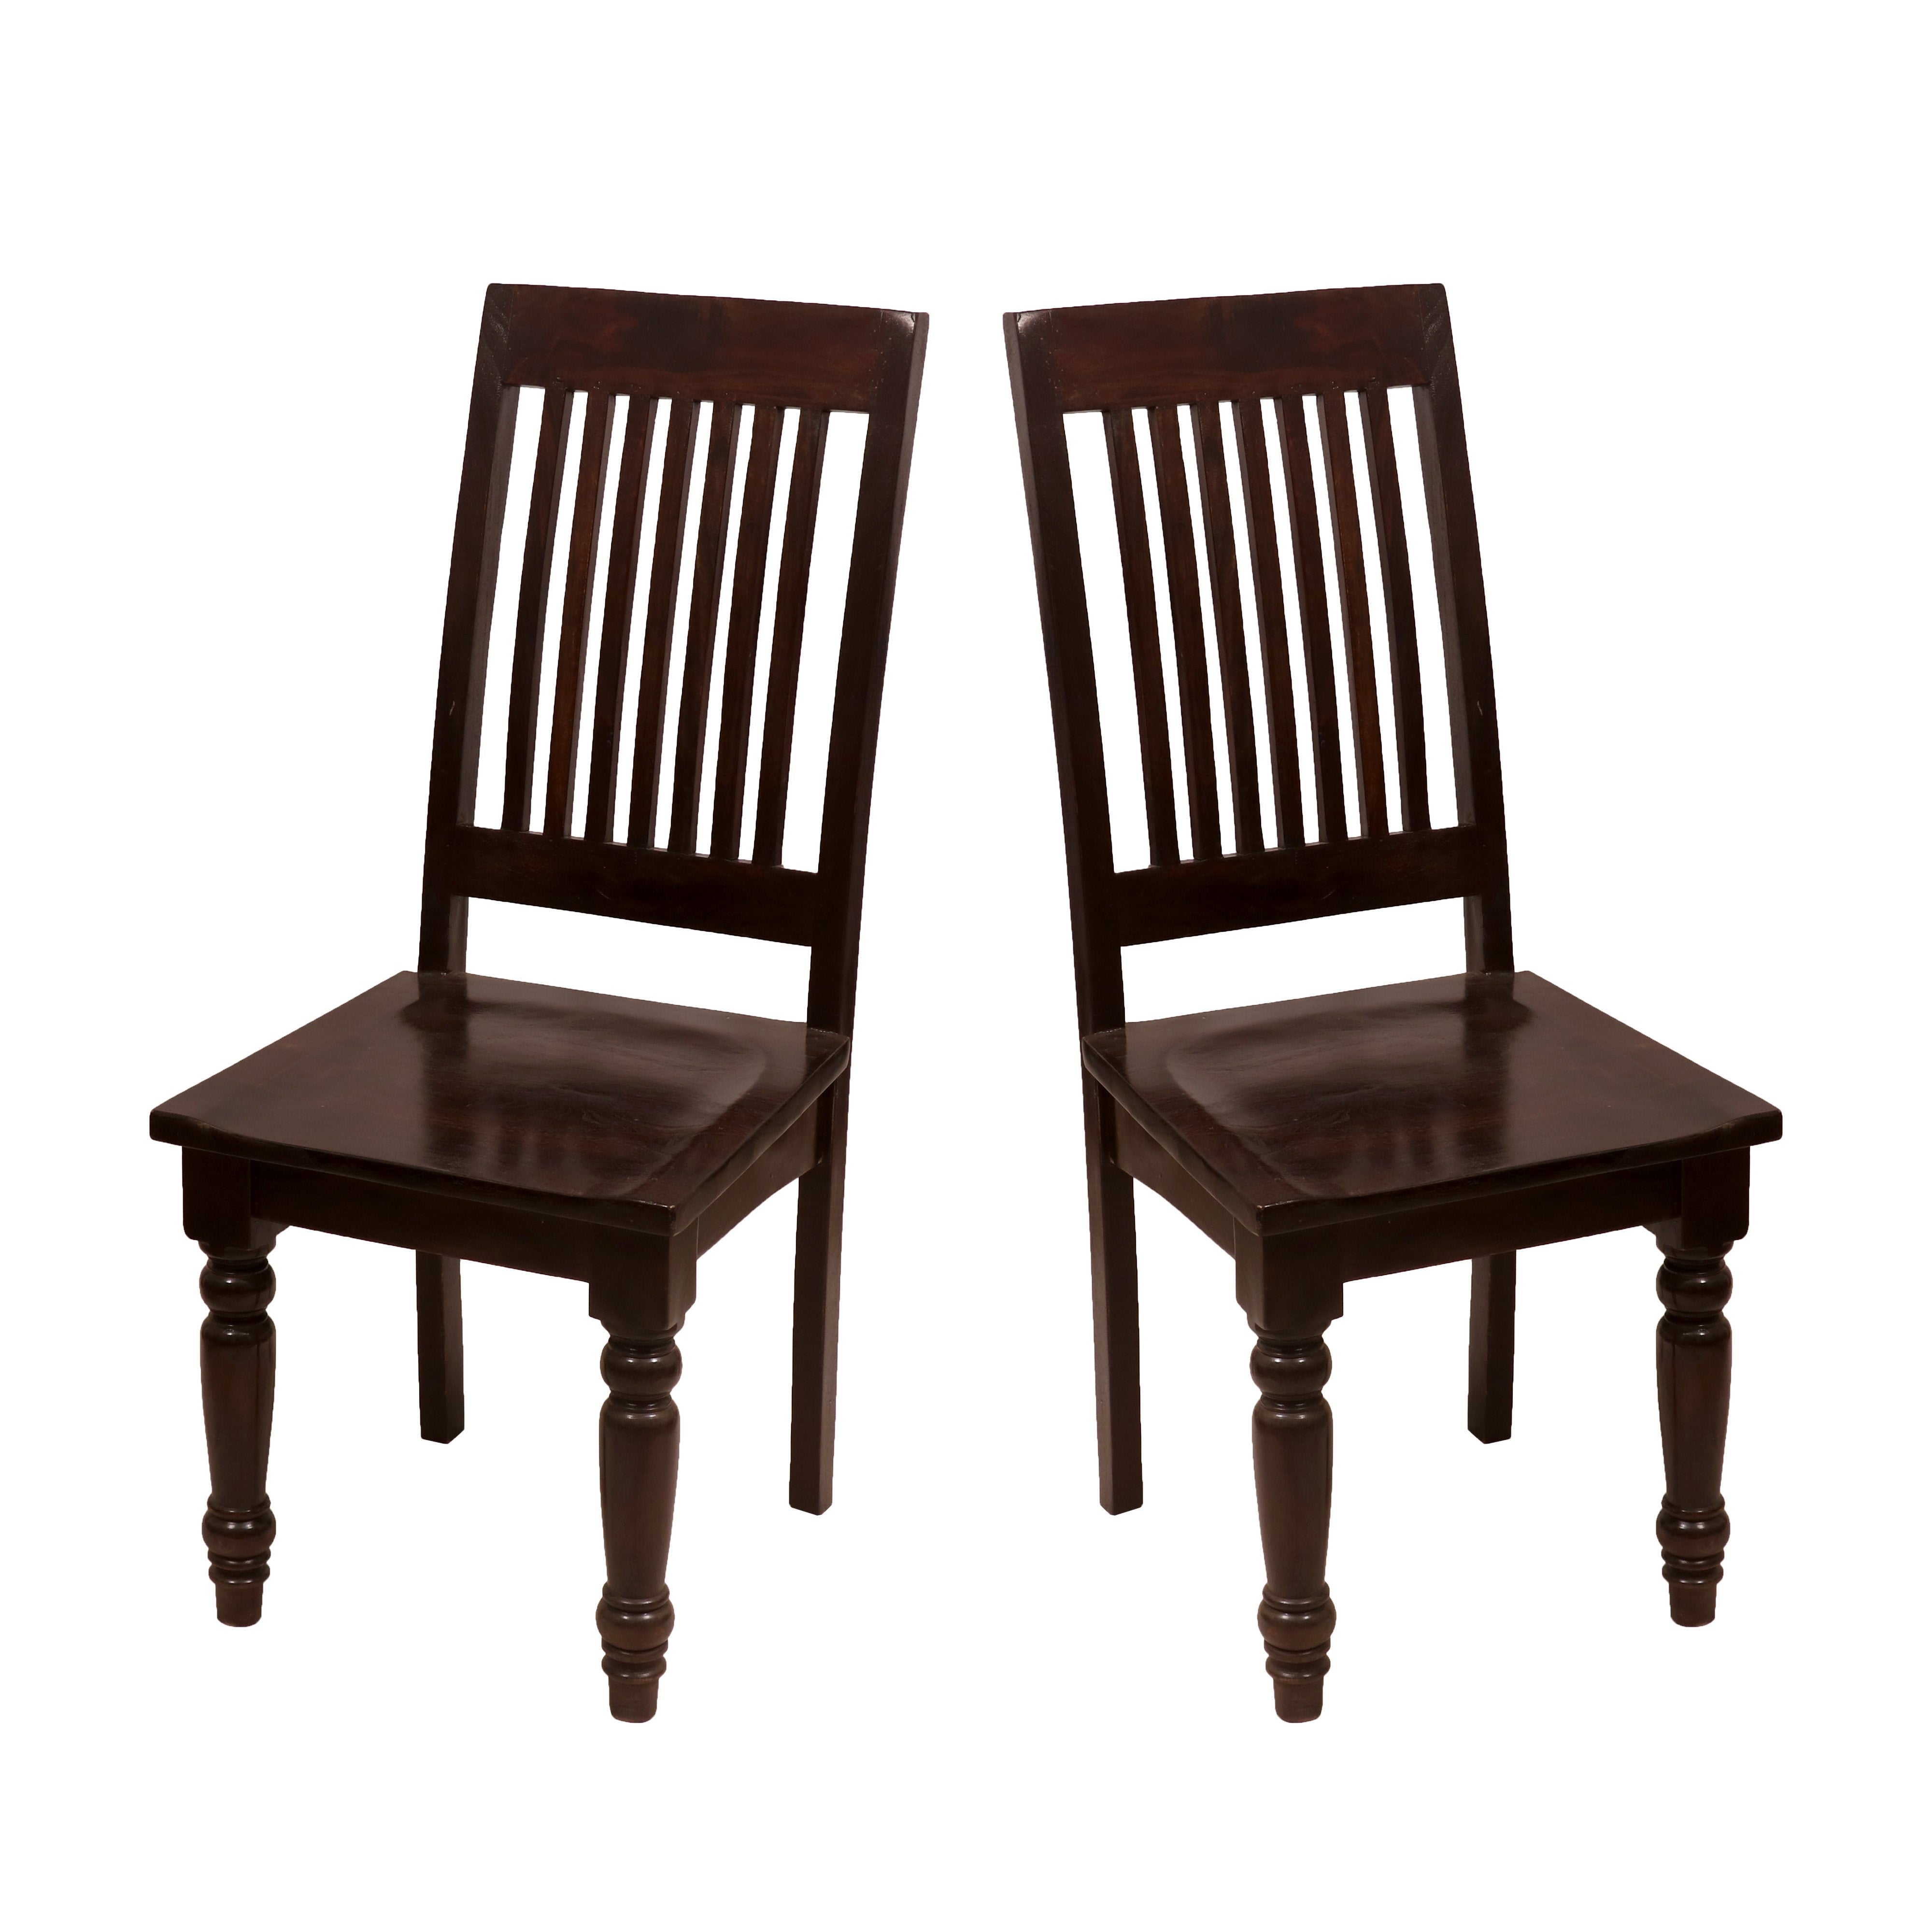 (Set of 2) Colonial Simple Wooden Chair Dining Chair